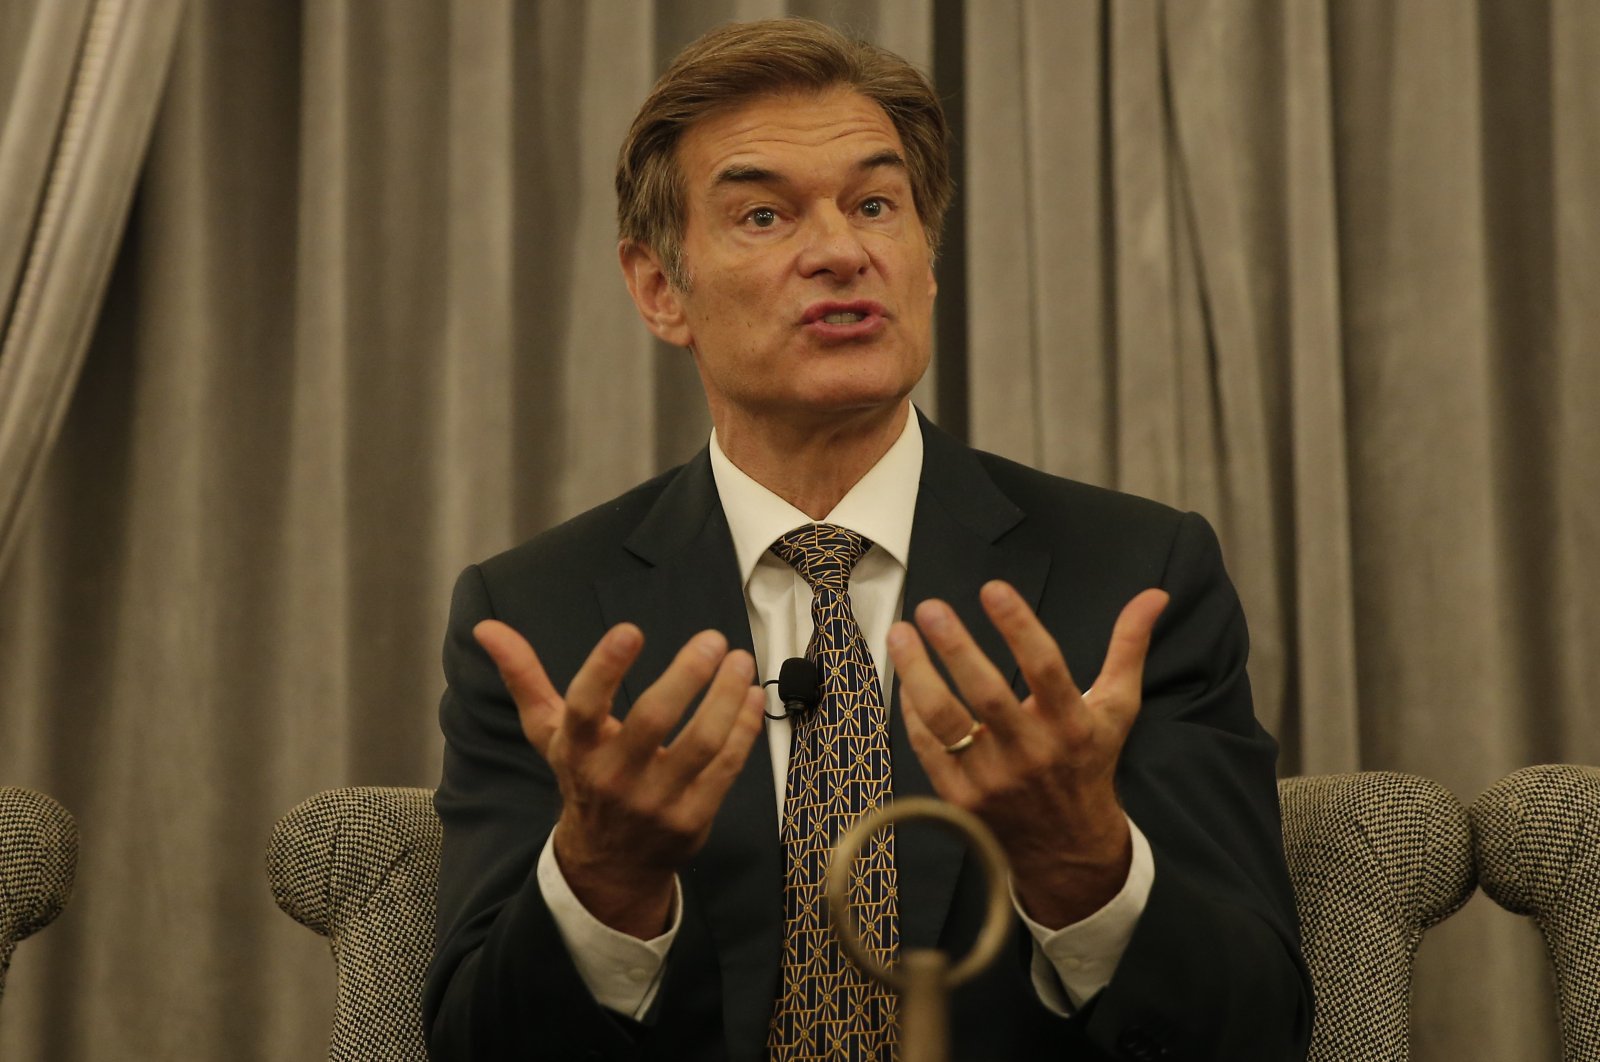 Dr. Mehmet Öz, more widely known as Dr. Oz, speaks at an event in Washington D.C., United States, Sept. 26, 2018. (AA Photo)